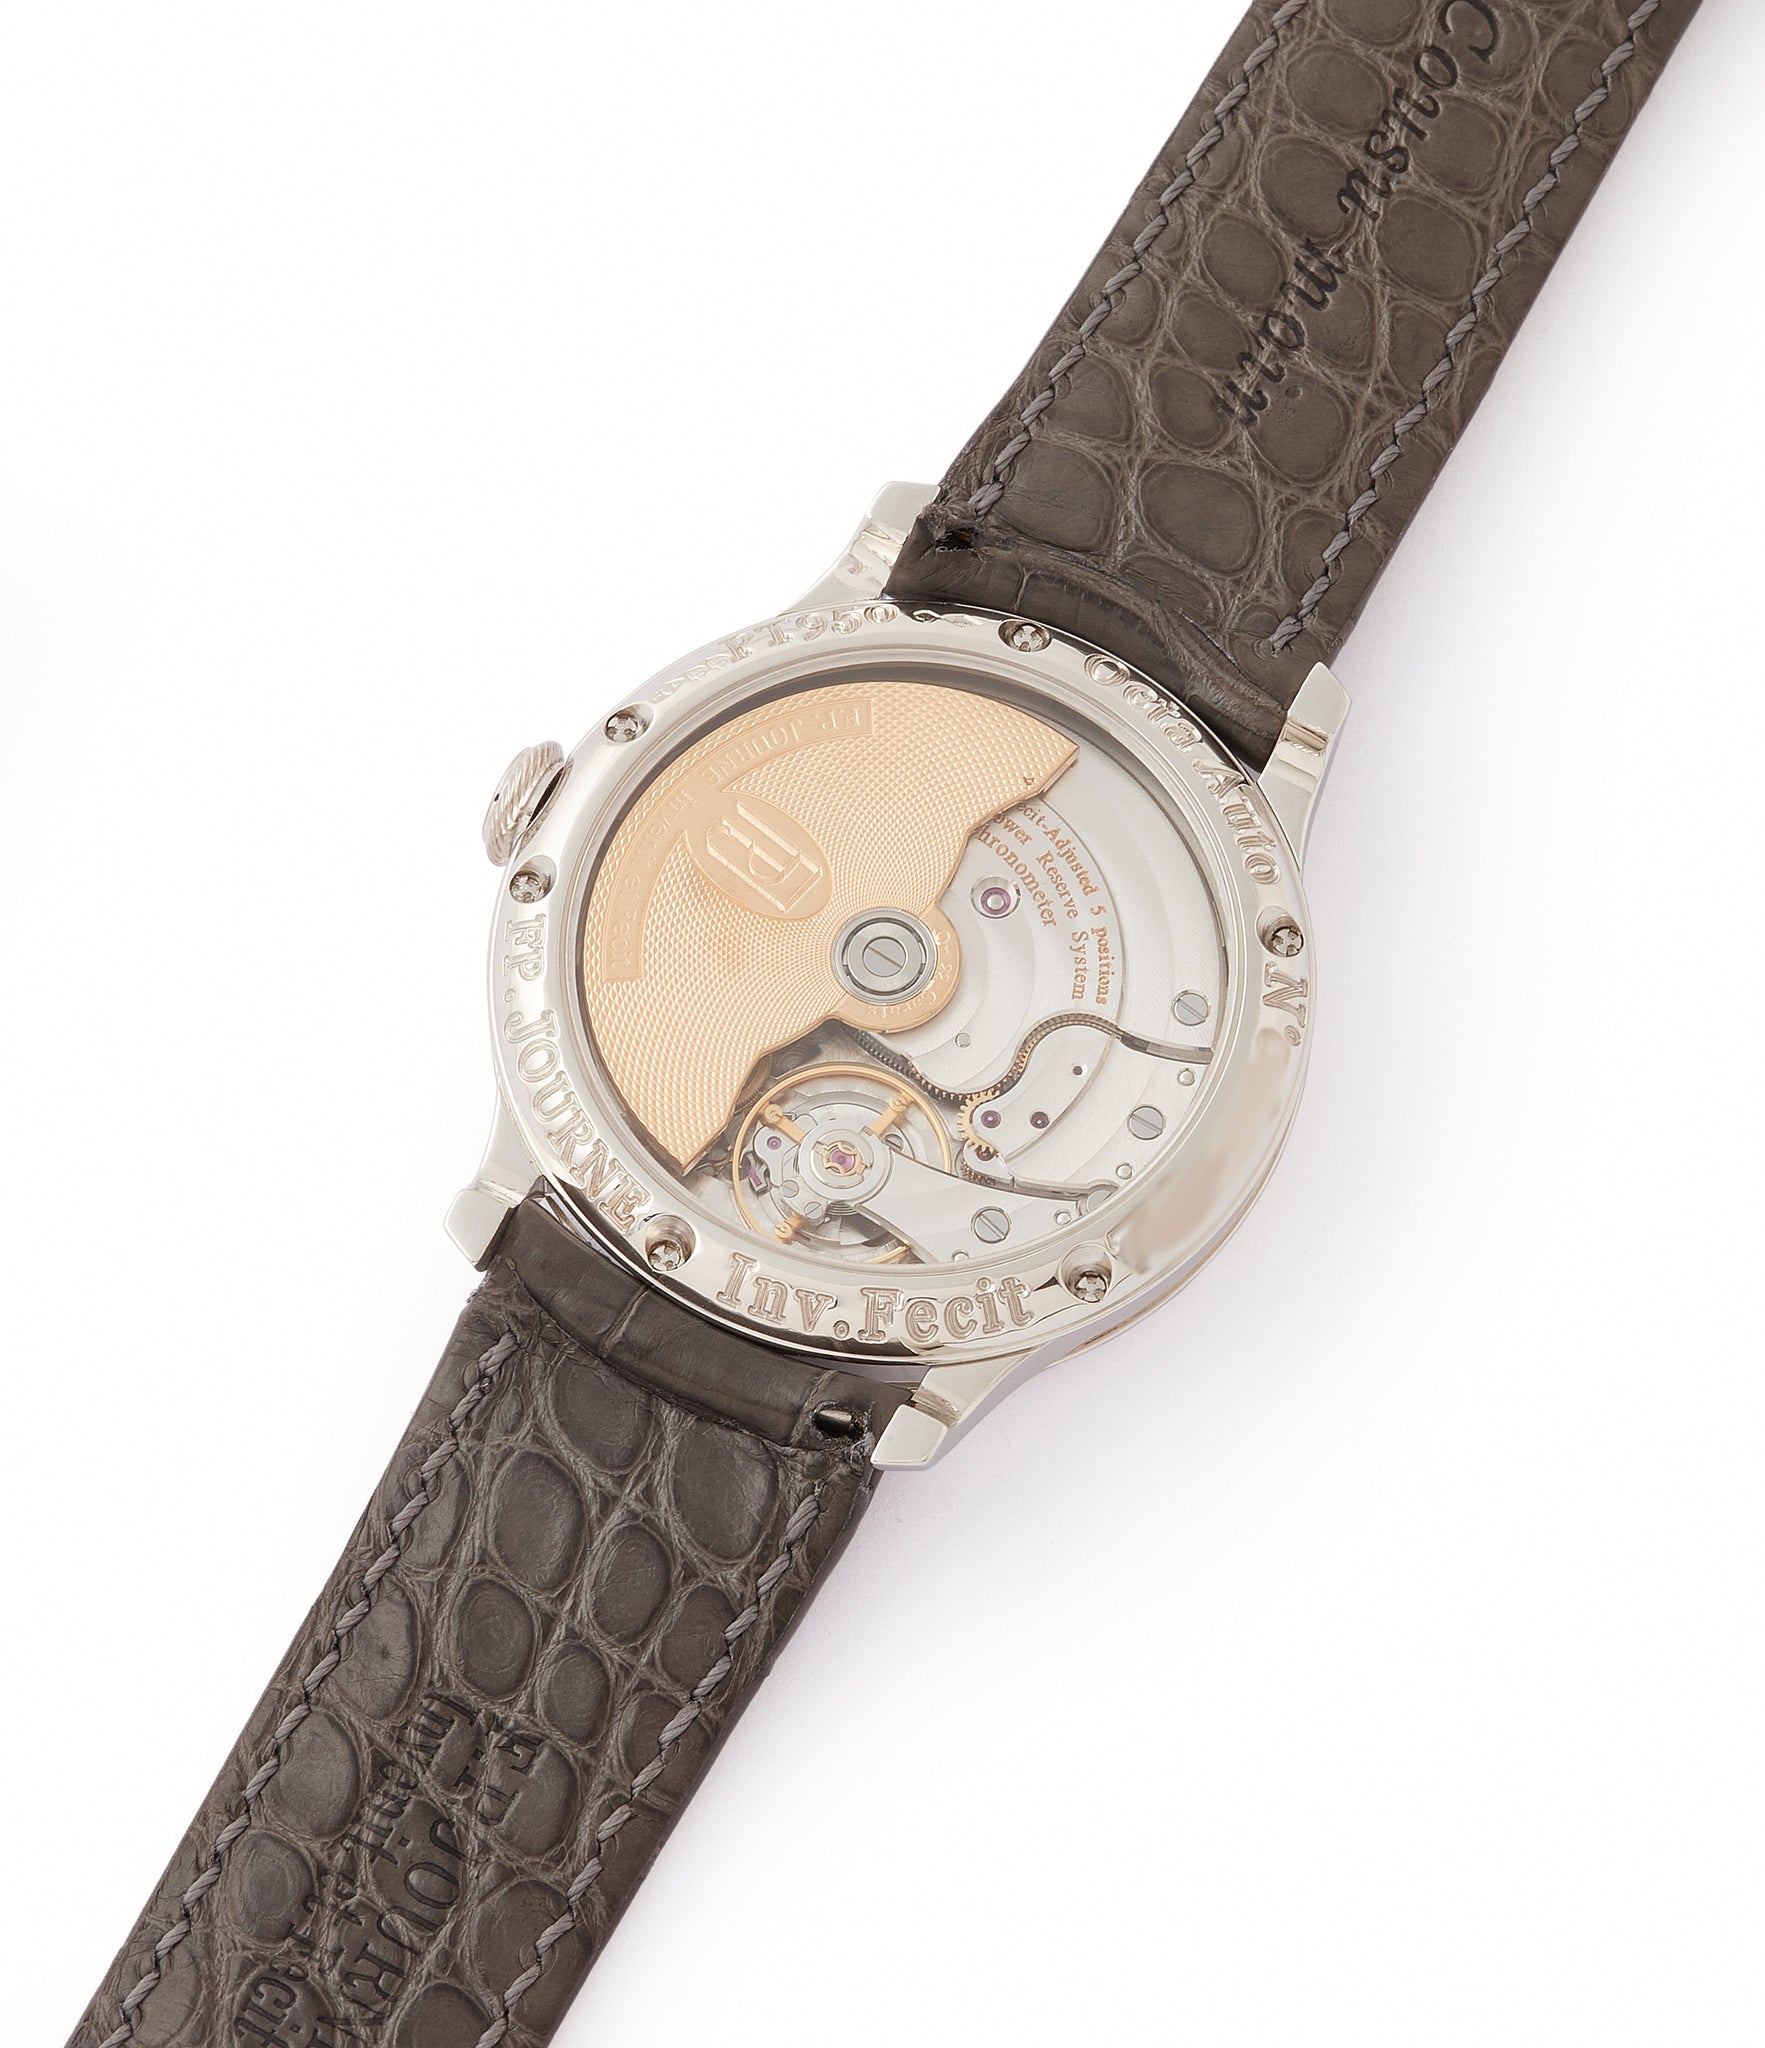 Cal. 1300.3 brass movement rare F. P. Journe Octa Lune 061-03L platinum rare watch for sale online at A Collected Man London specialist of independent watchmakers